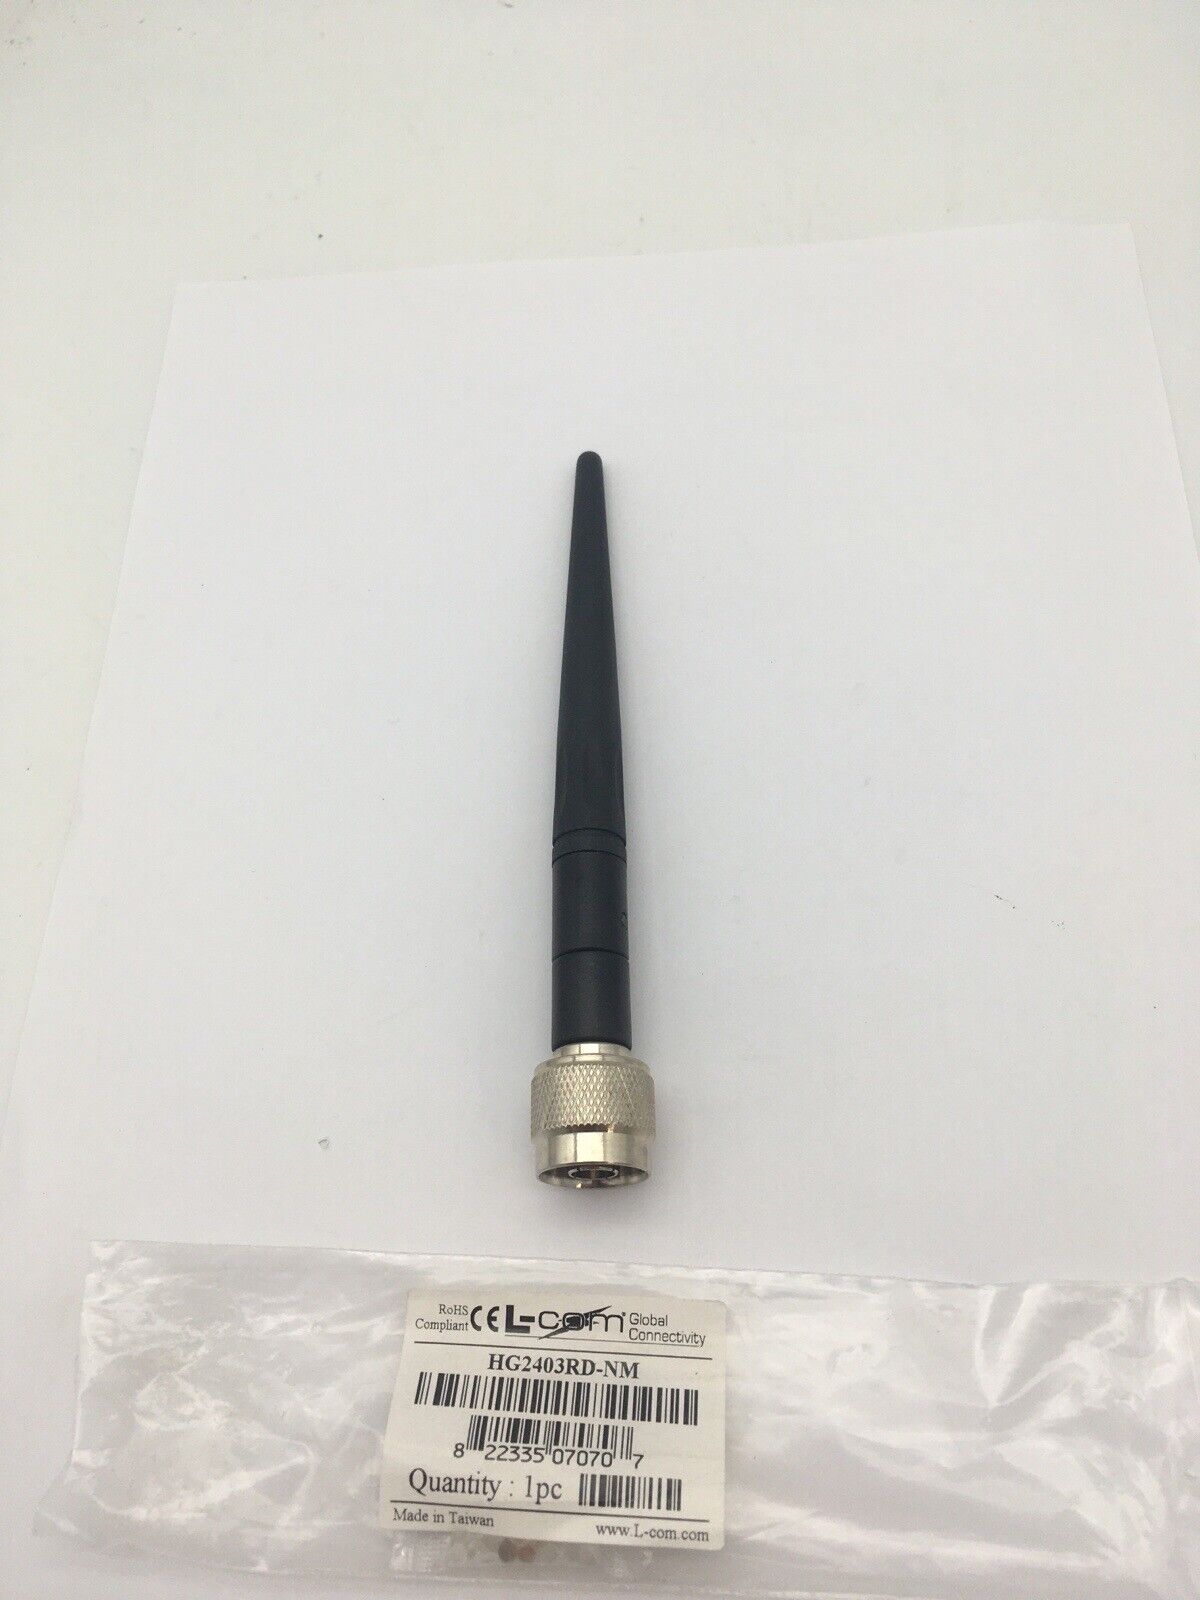 L-Com HG2403-NM Rubber Duck Antenna 2.4 GHz 3dBi N-Male Connector